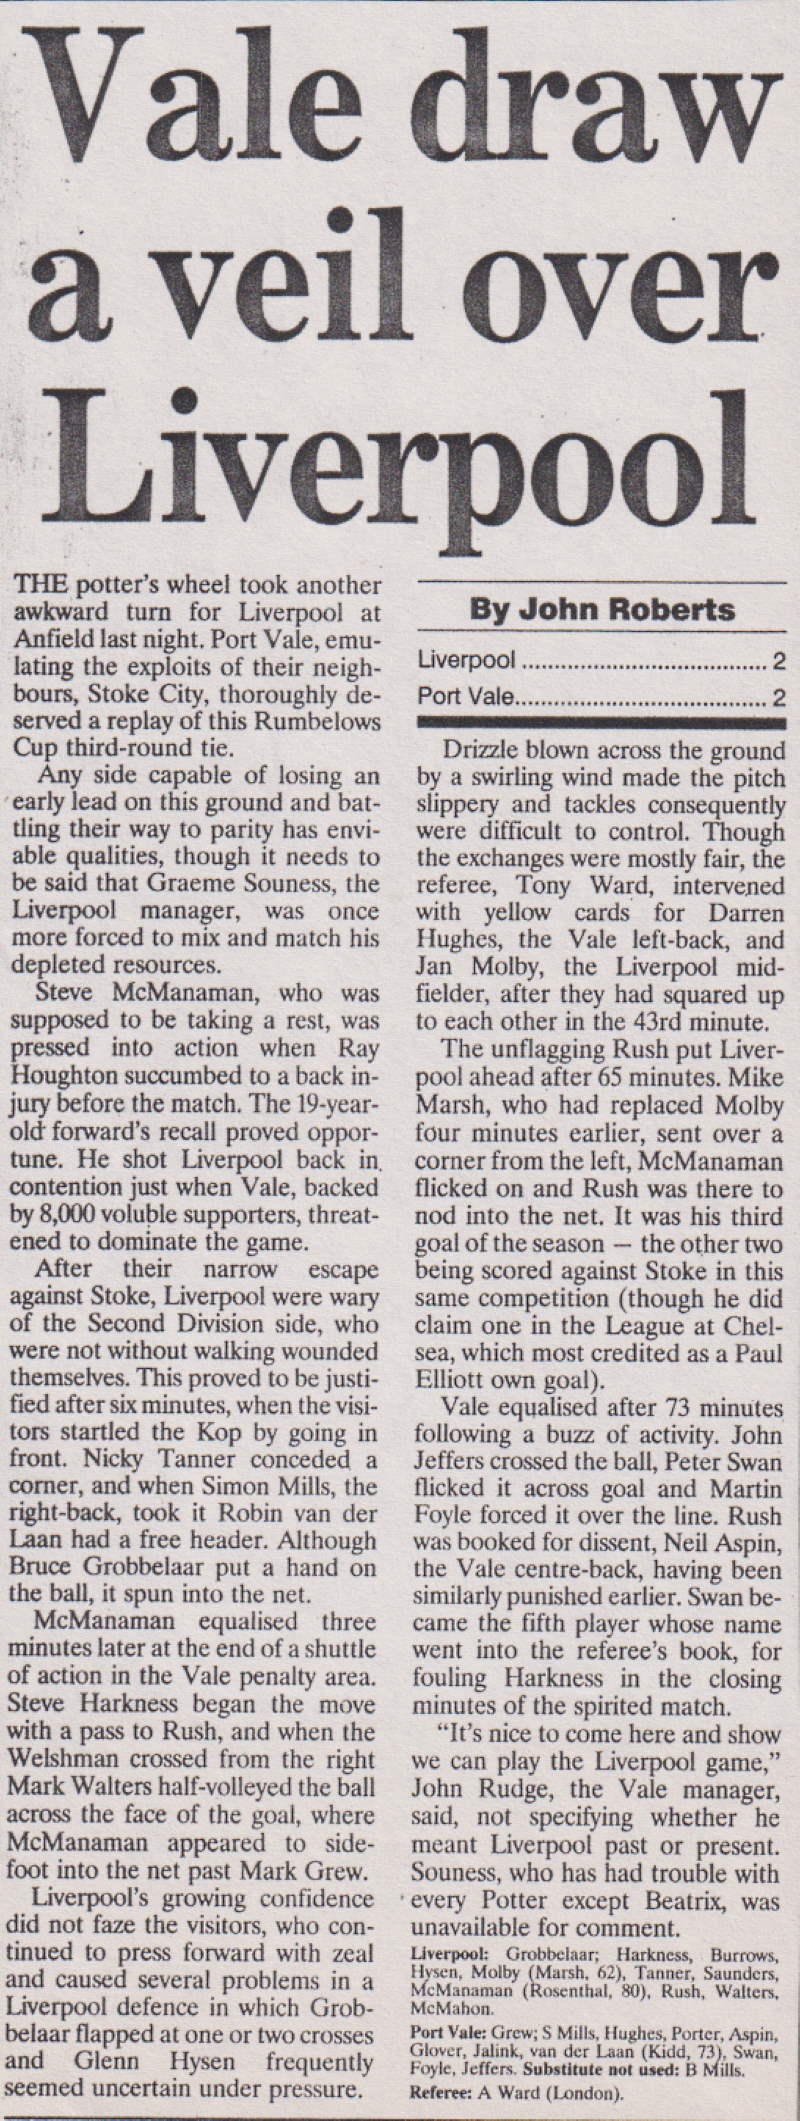 Liverpool 2-2 Port Vale - press clipping